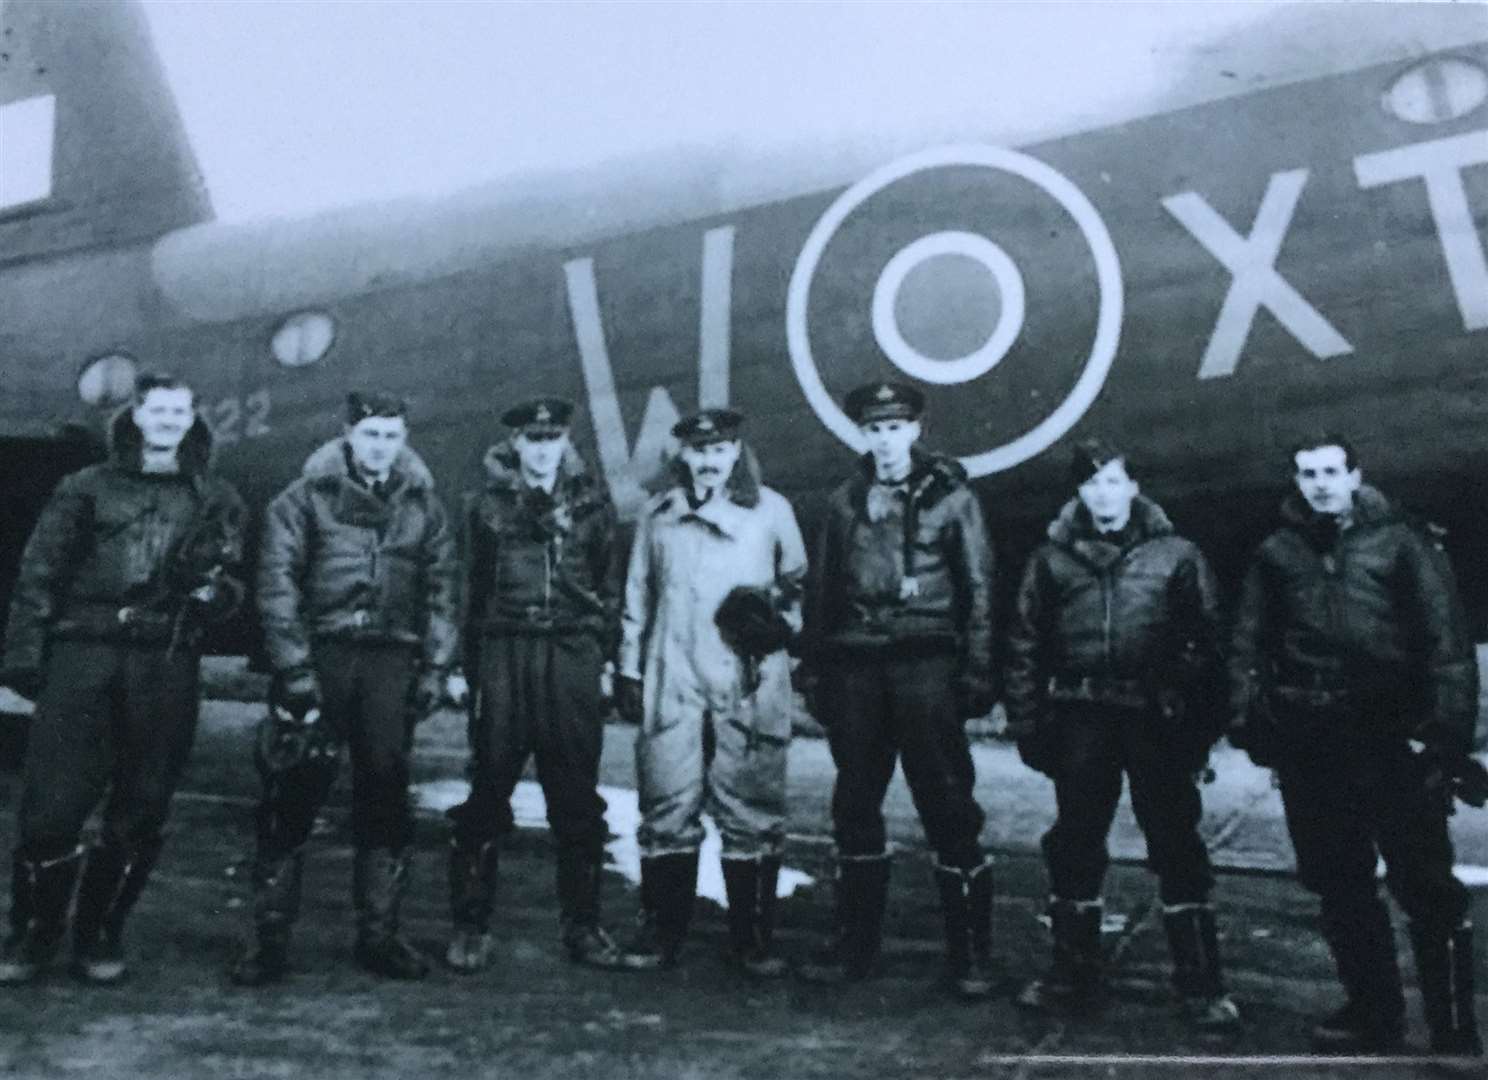 The seven ill-fated crew members of the Short Stirling Bomber, including Sgt Shrubsall, far right